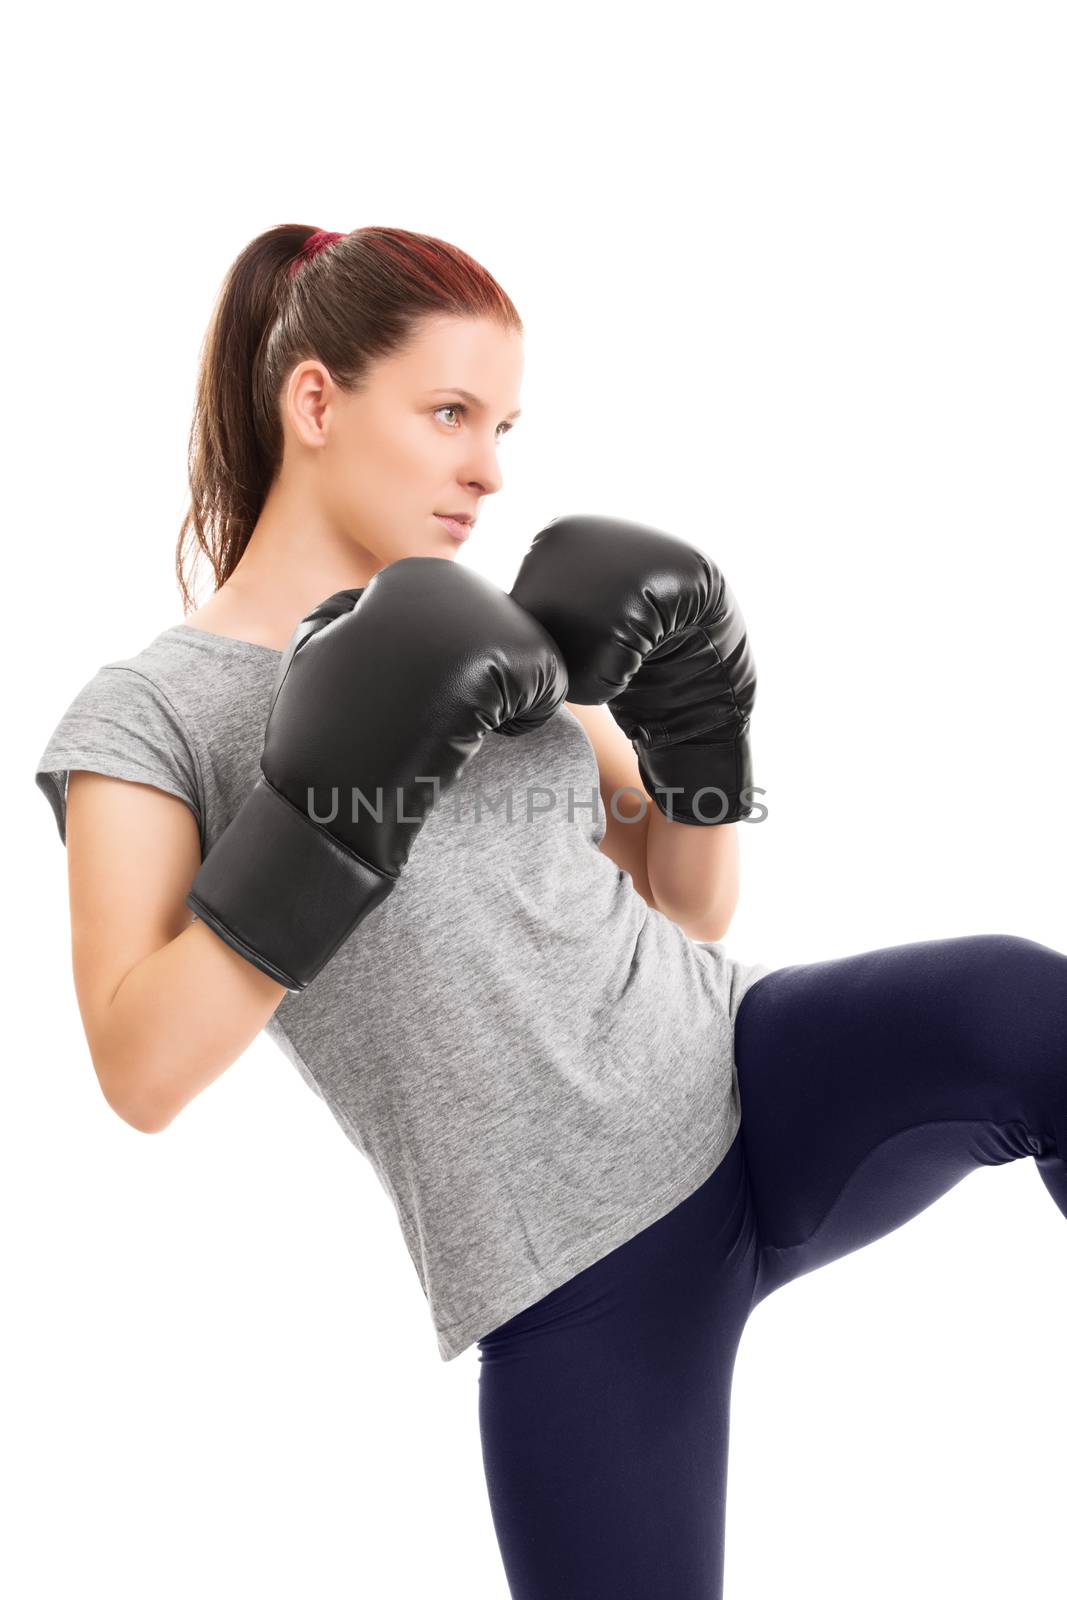 A profile of a beautiful young girl with boxing gloves delivering a kick, isolated on white background.